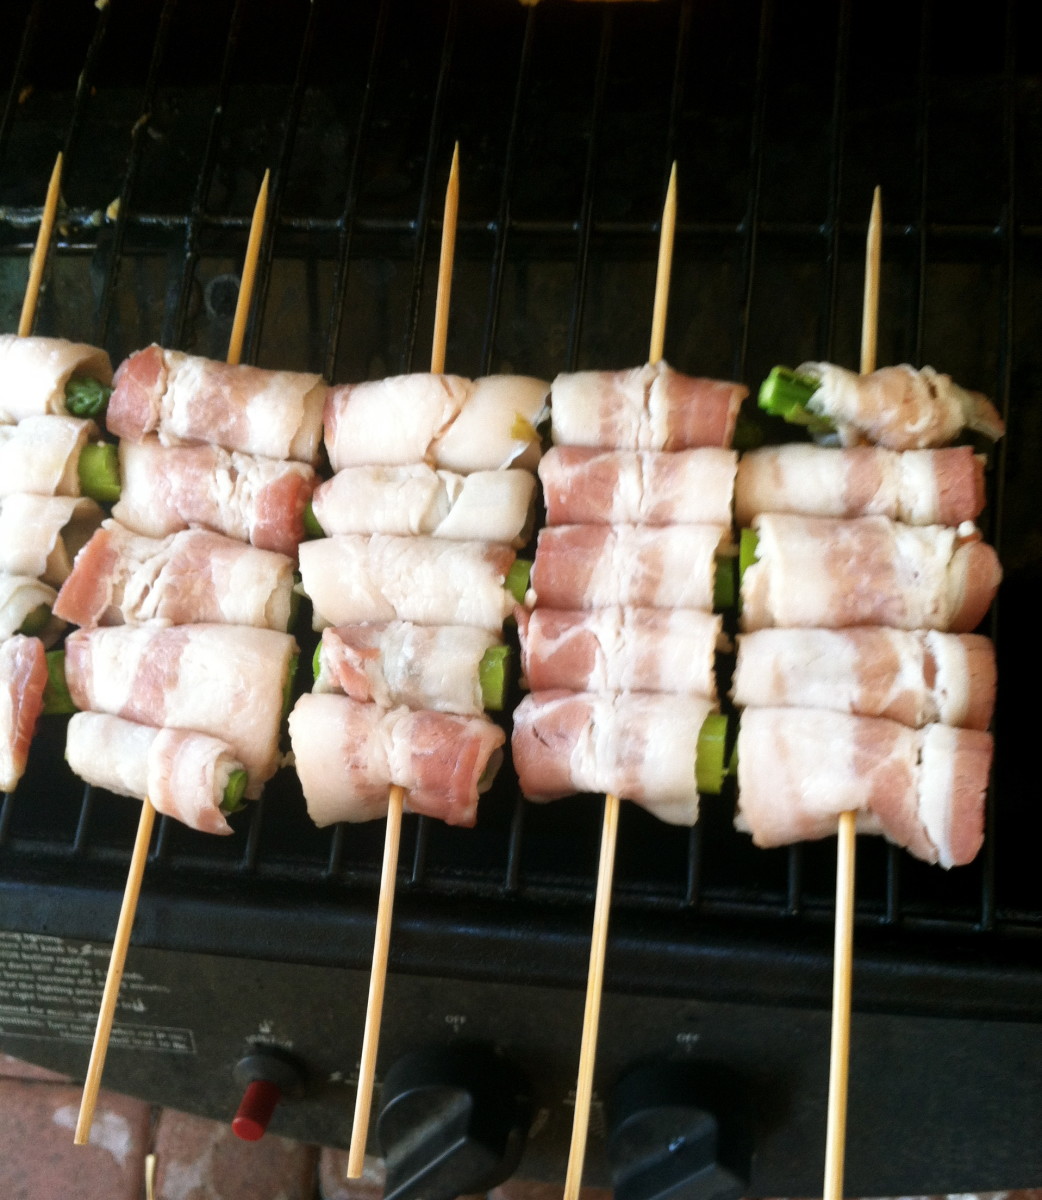 Here are the skewers on the BBQ.